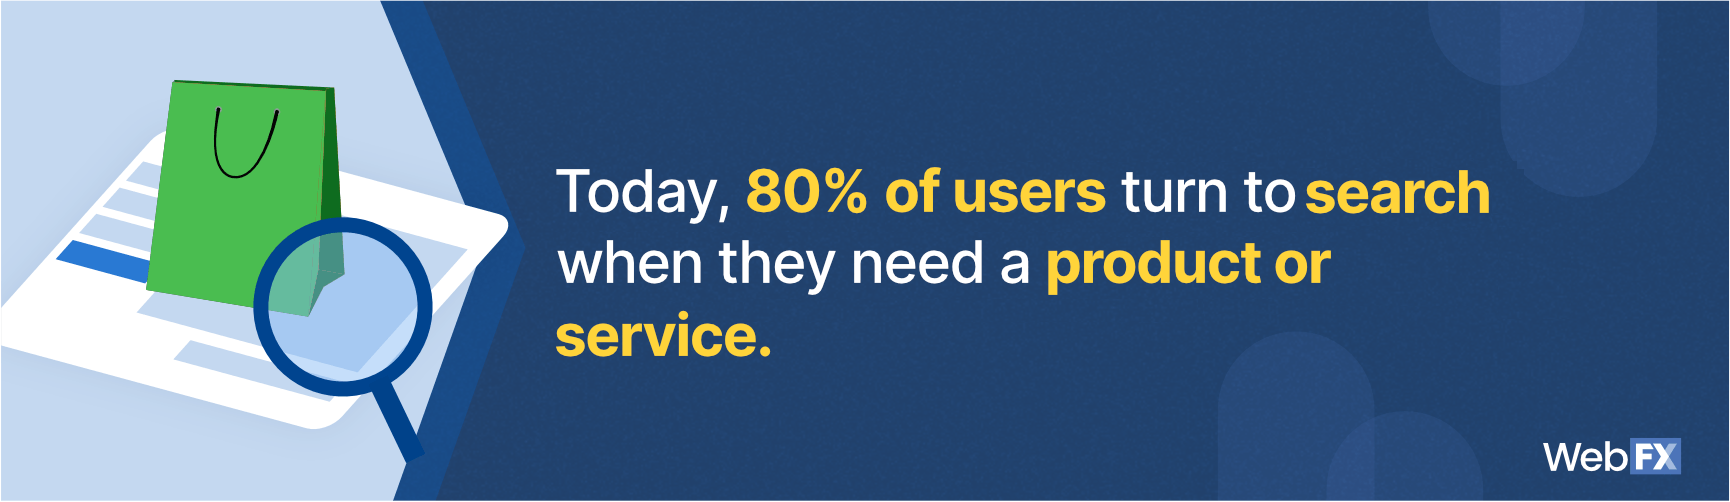 A statistic on the percentage of users that search for a product or service via a search engine